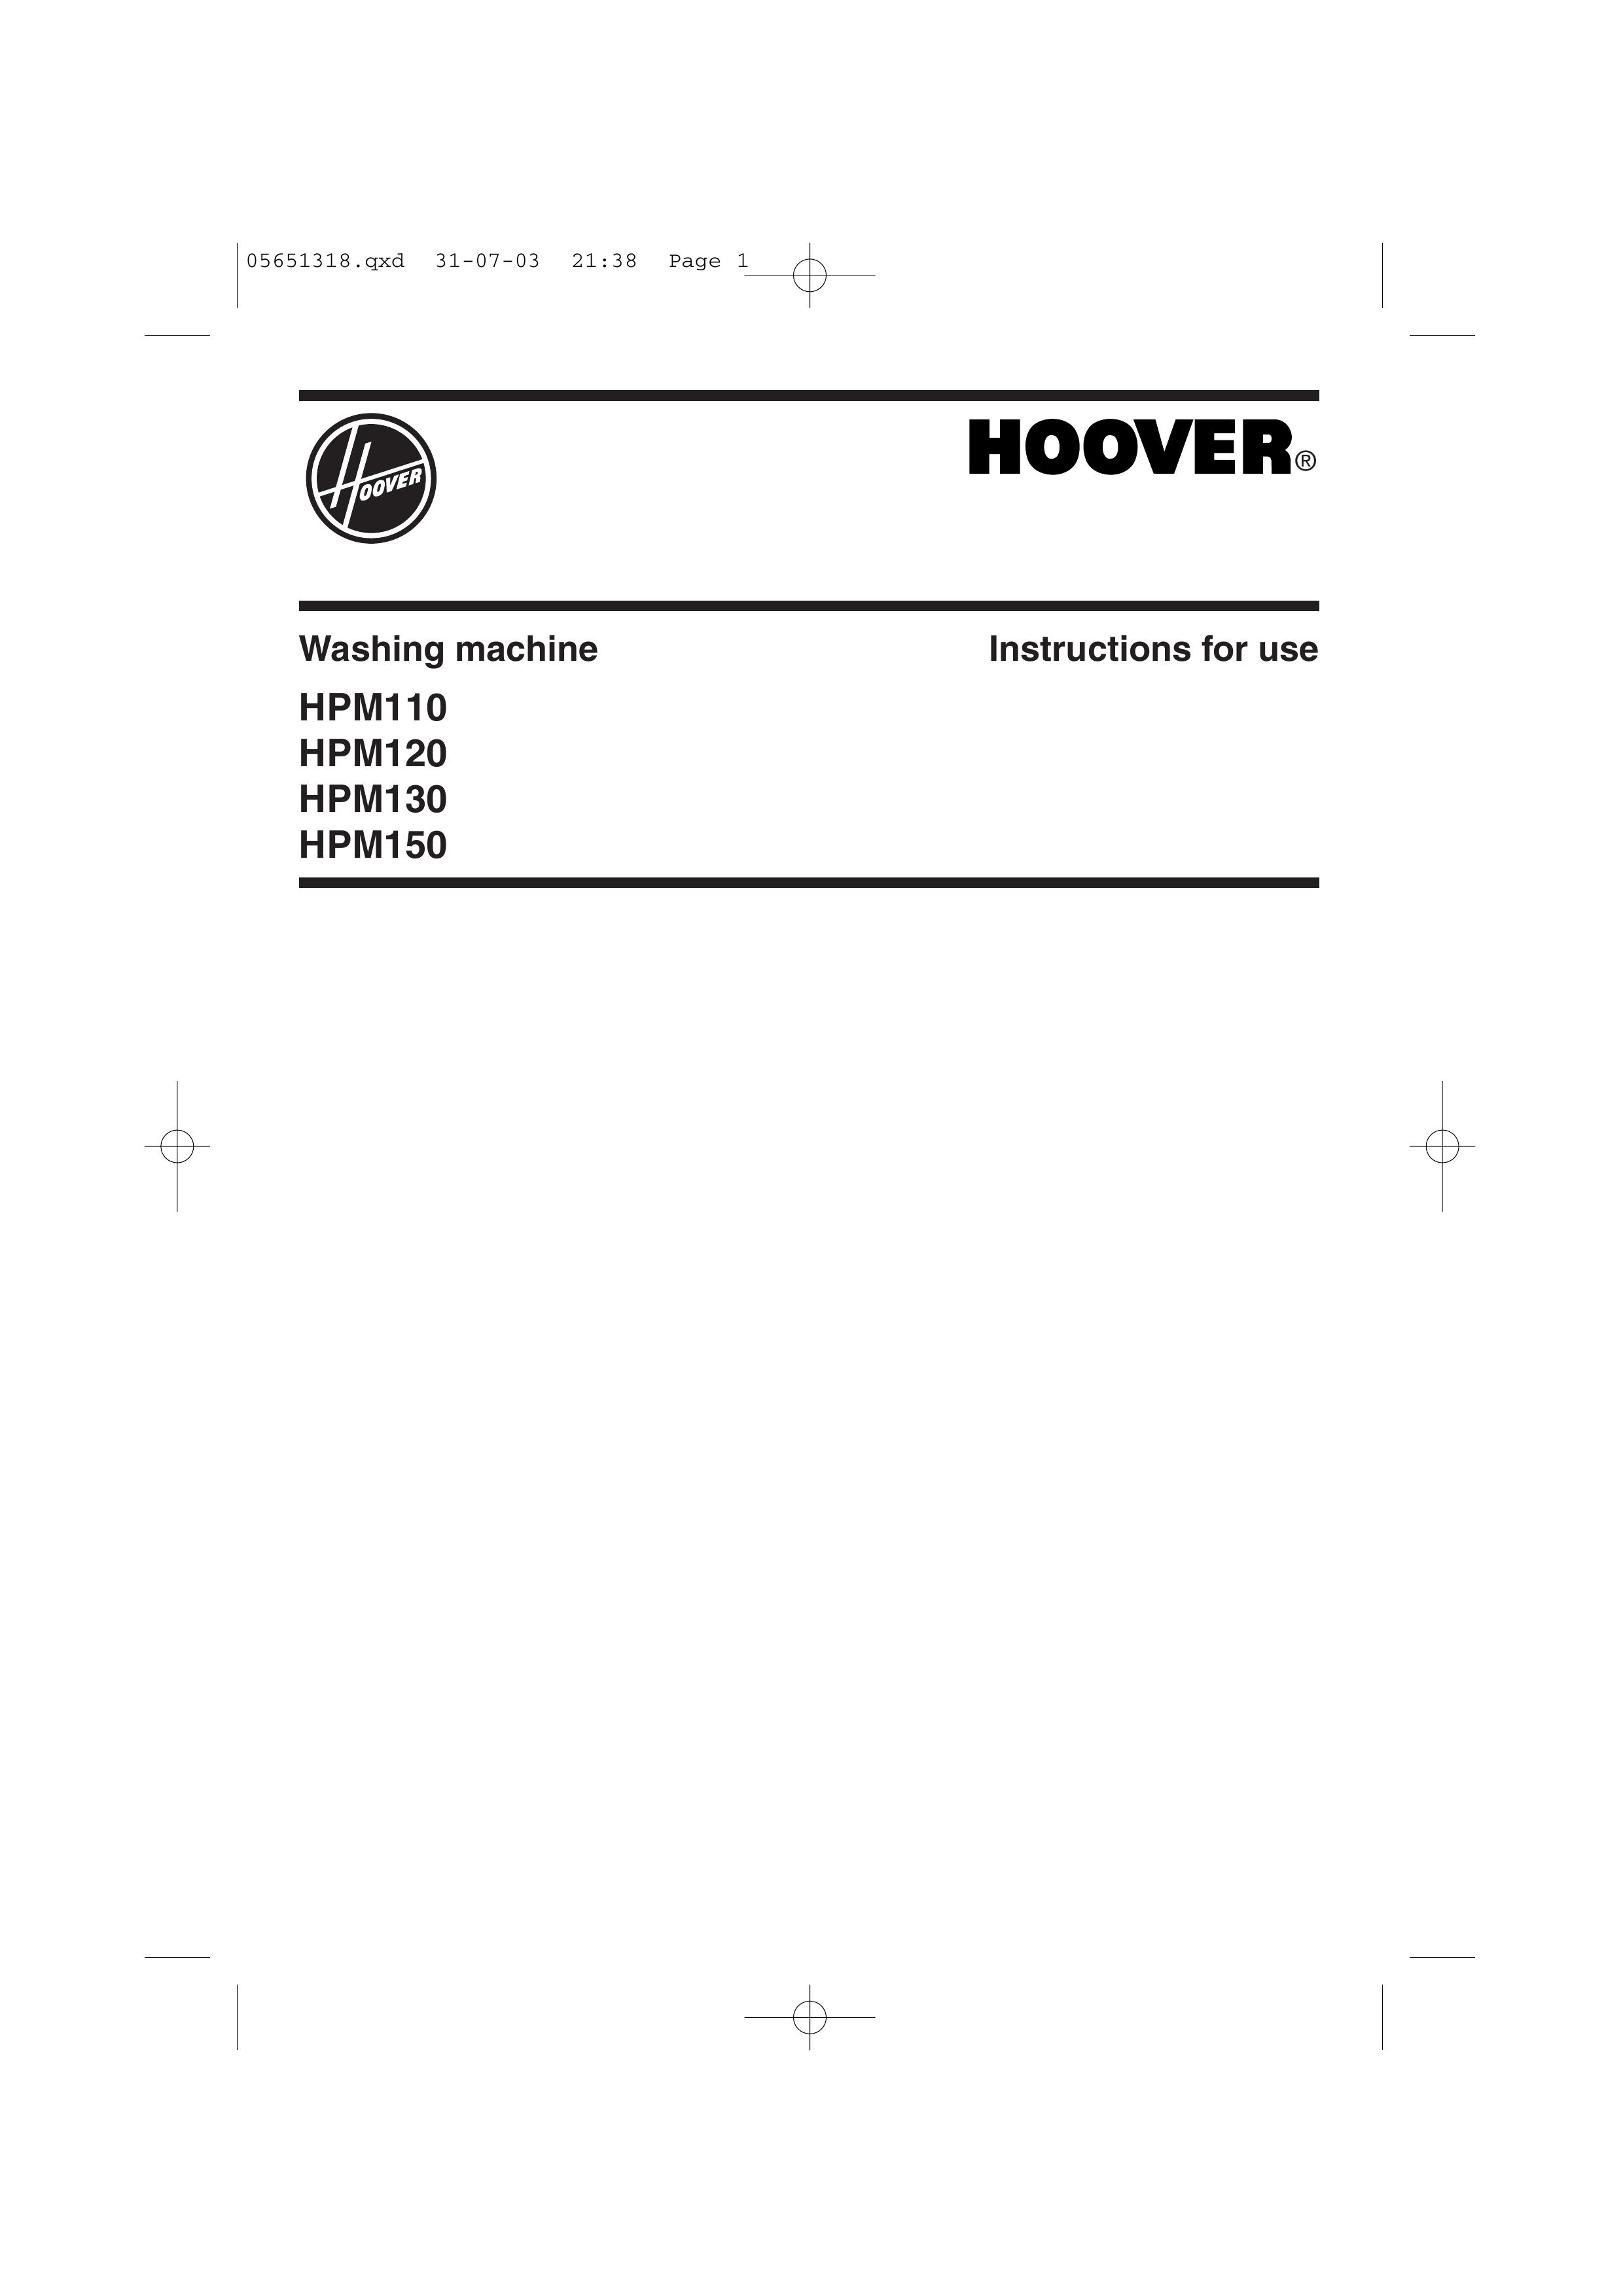 Hoover HPM150 Washer User Manual